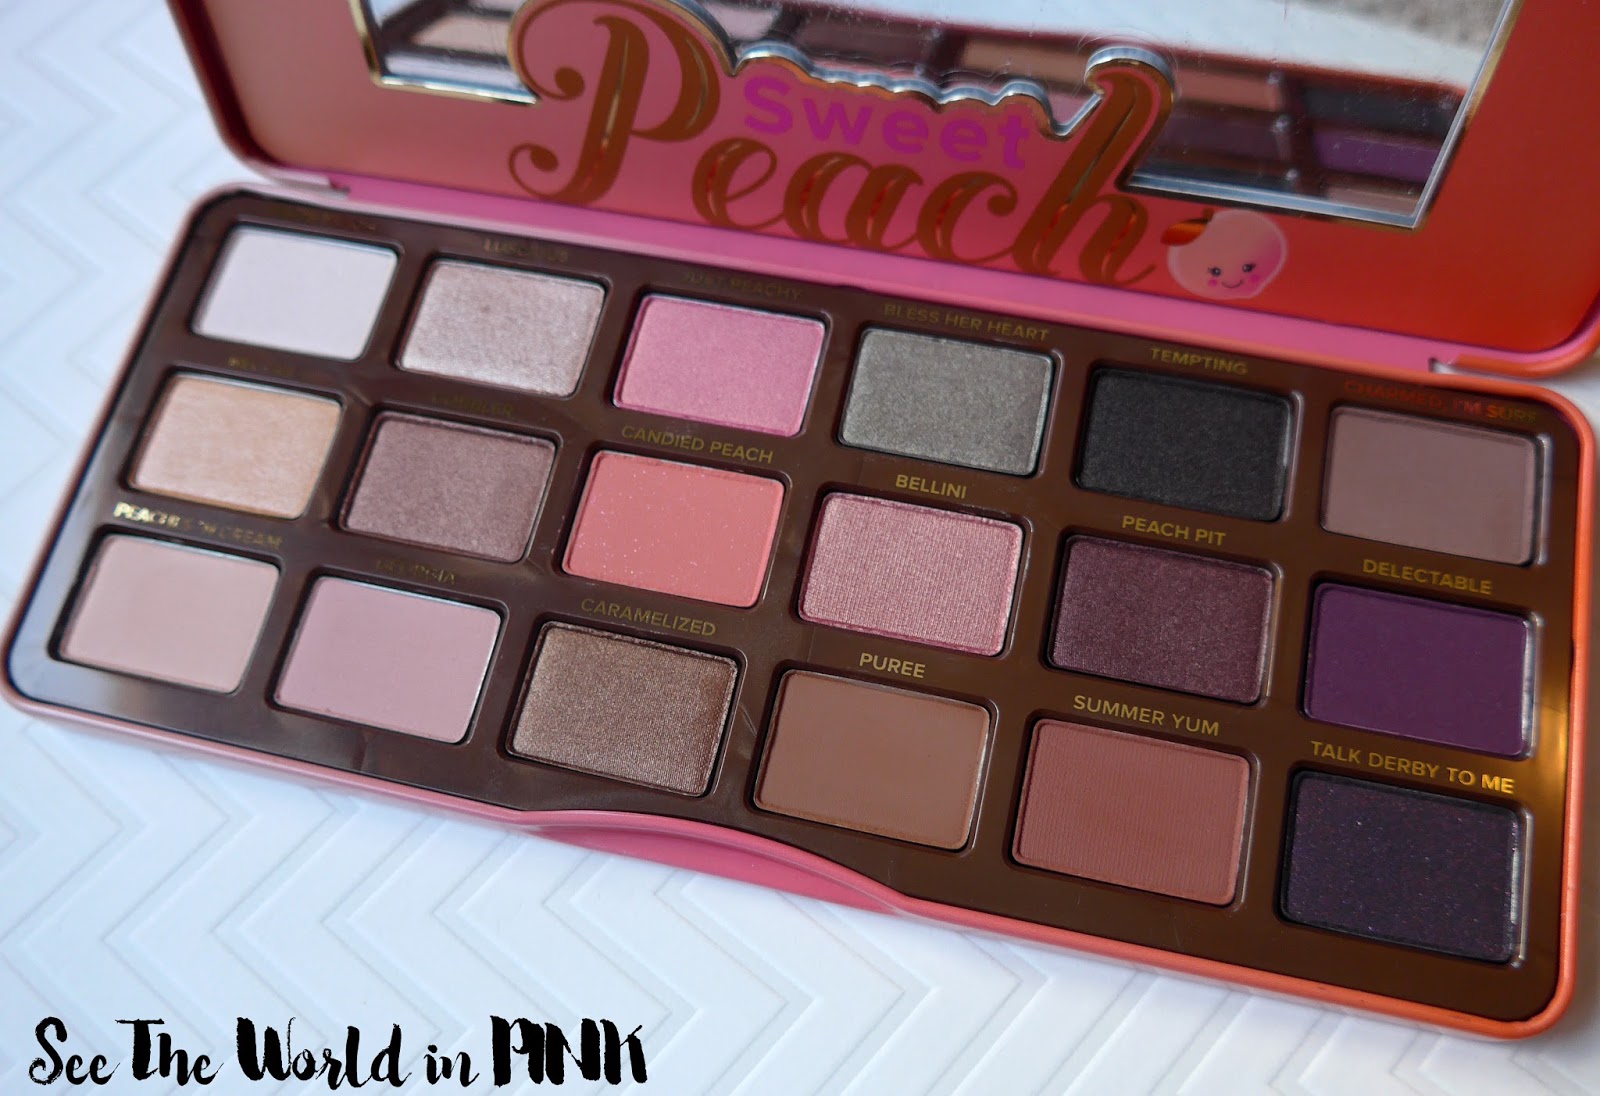 Too Faced Sweet Peach Palette Review, Swatches and Makeup Looks